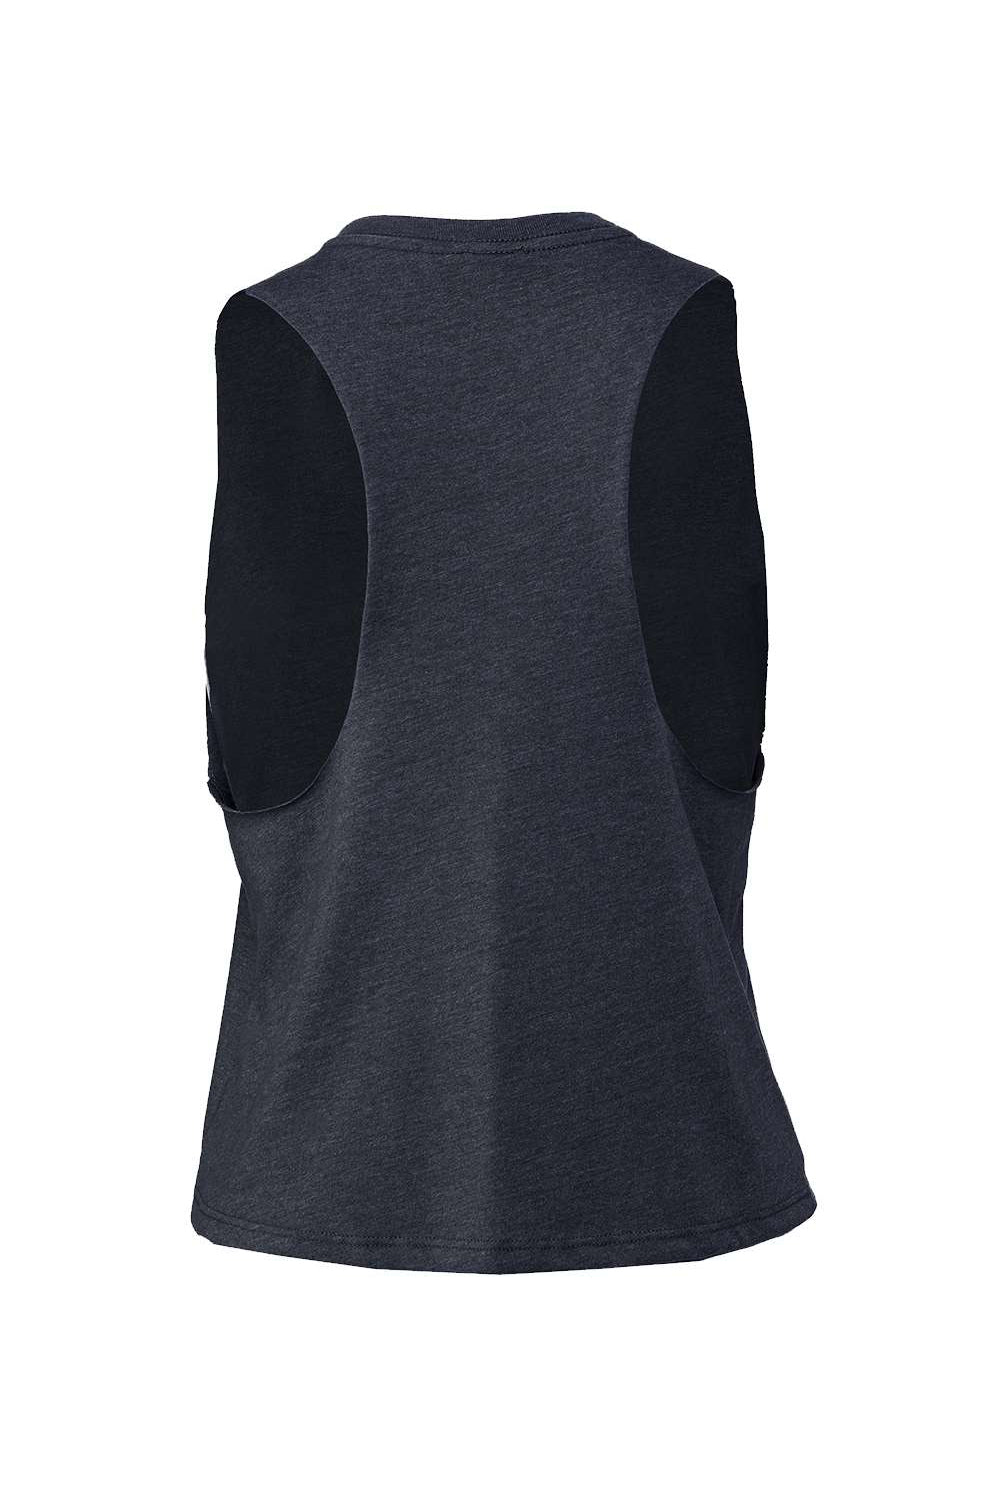 Bella + Canvas BC6682/6682 Womens Cropped Tank Top Heather Navy Blue Flat Back